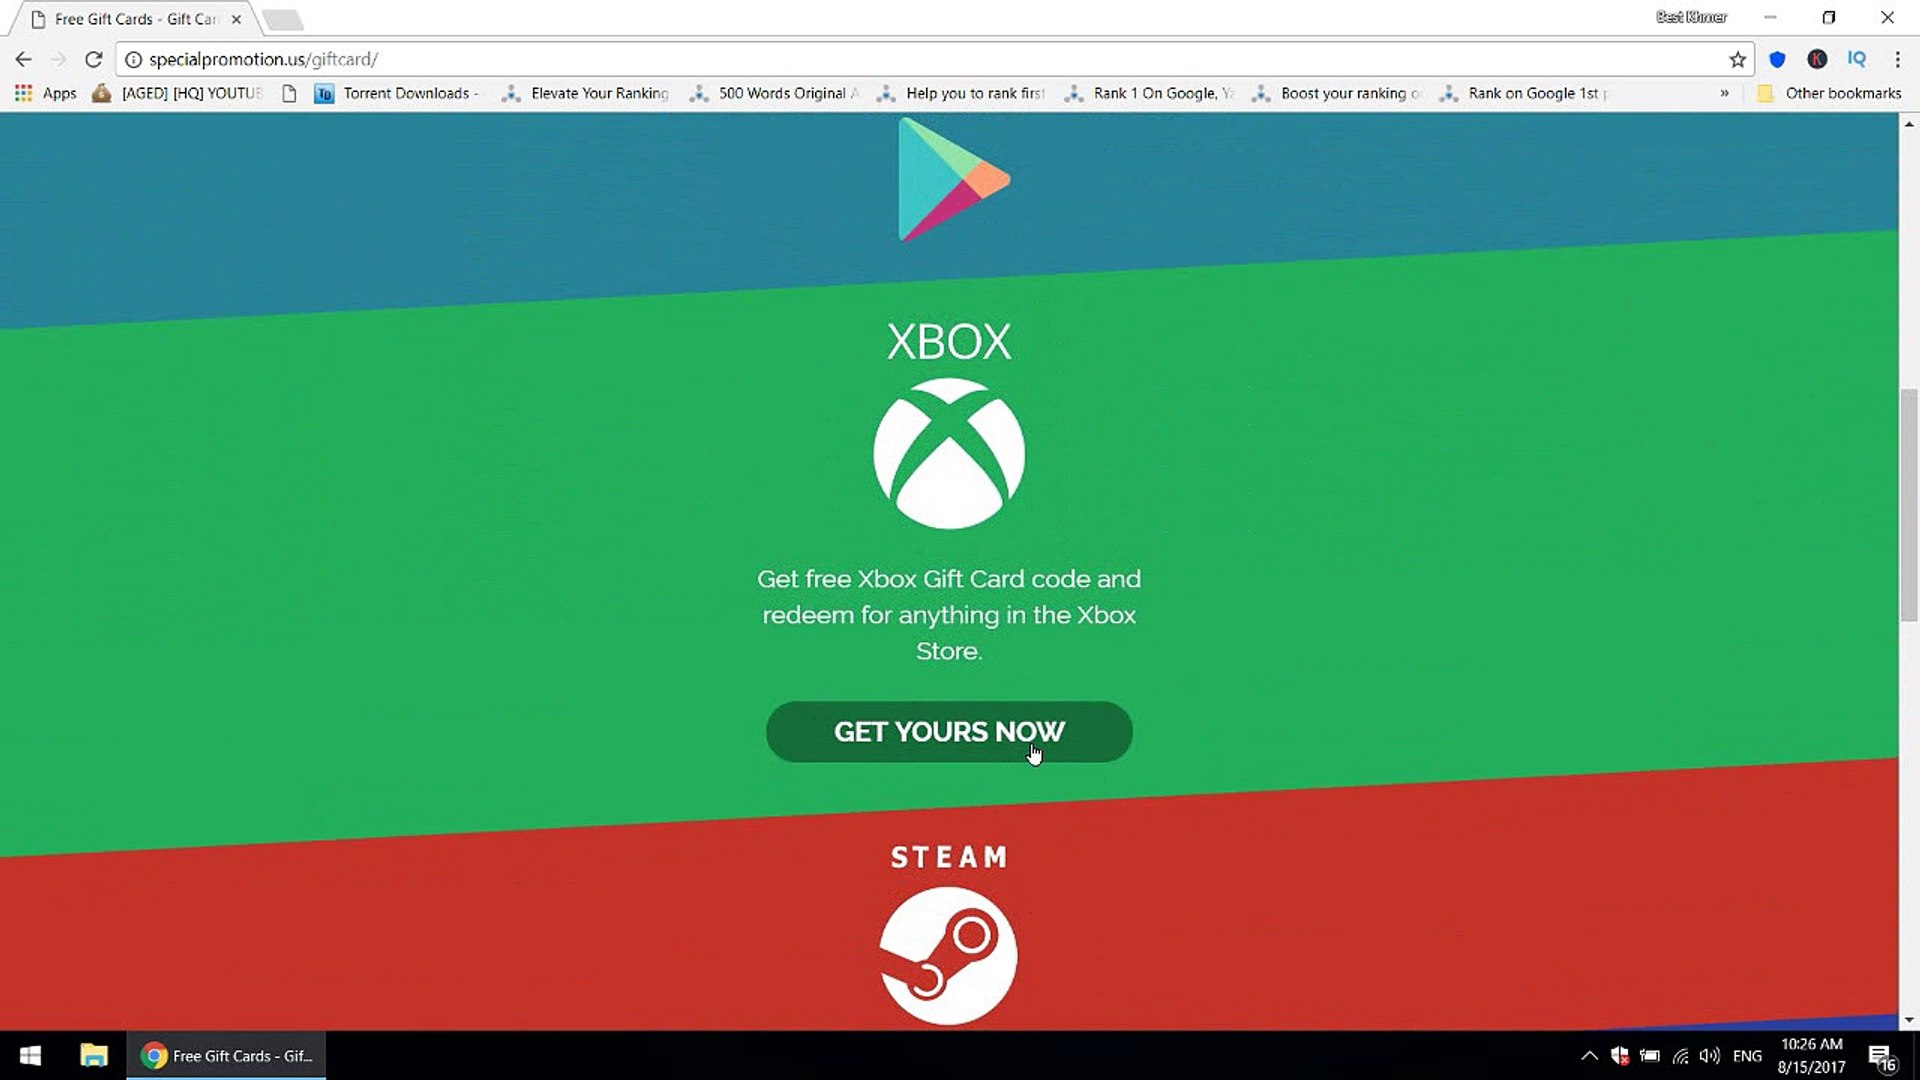 how to get free xbox gift cards - free xbox gift card codes - free xbox  gift cards *update New* - video Dailymotion